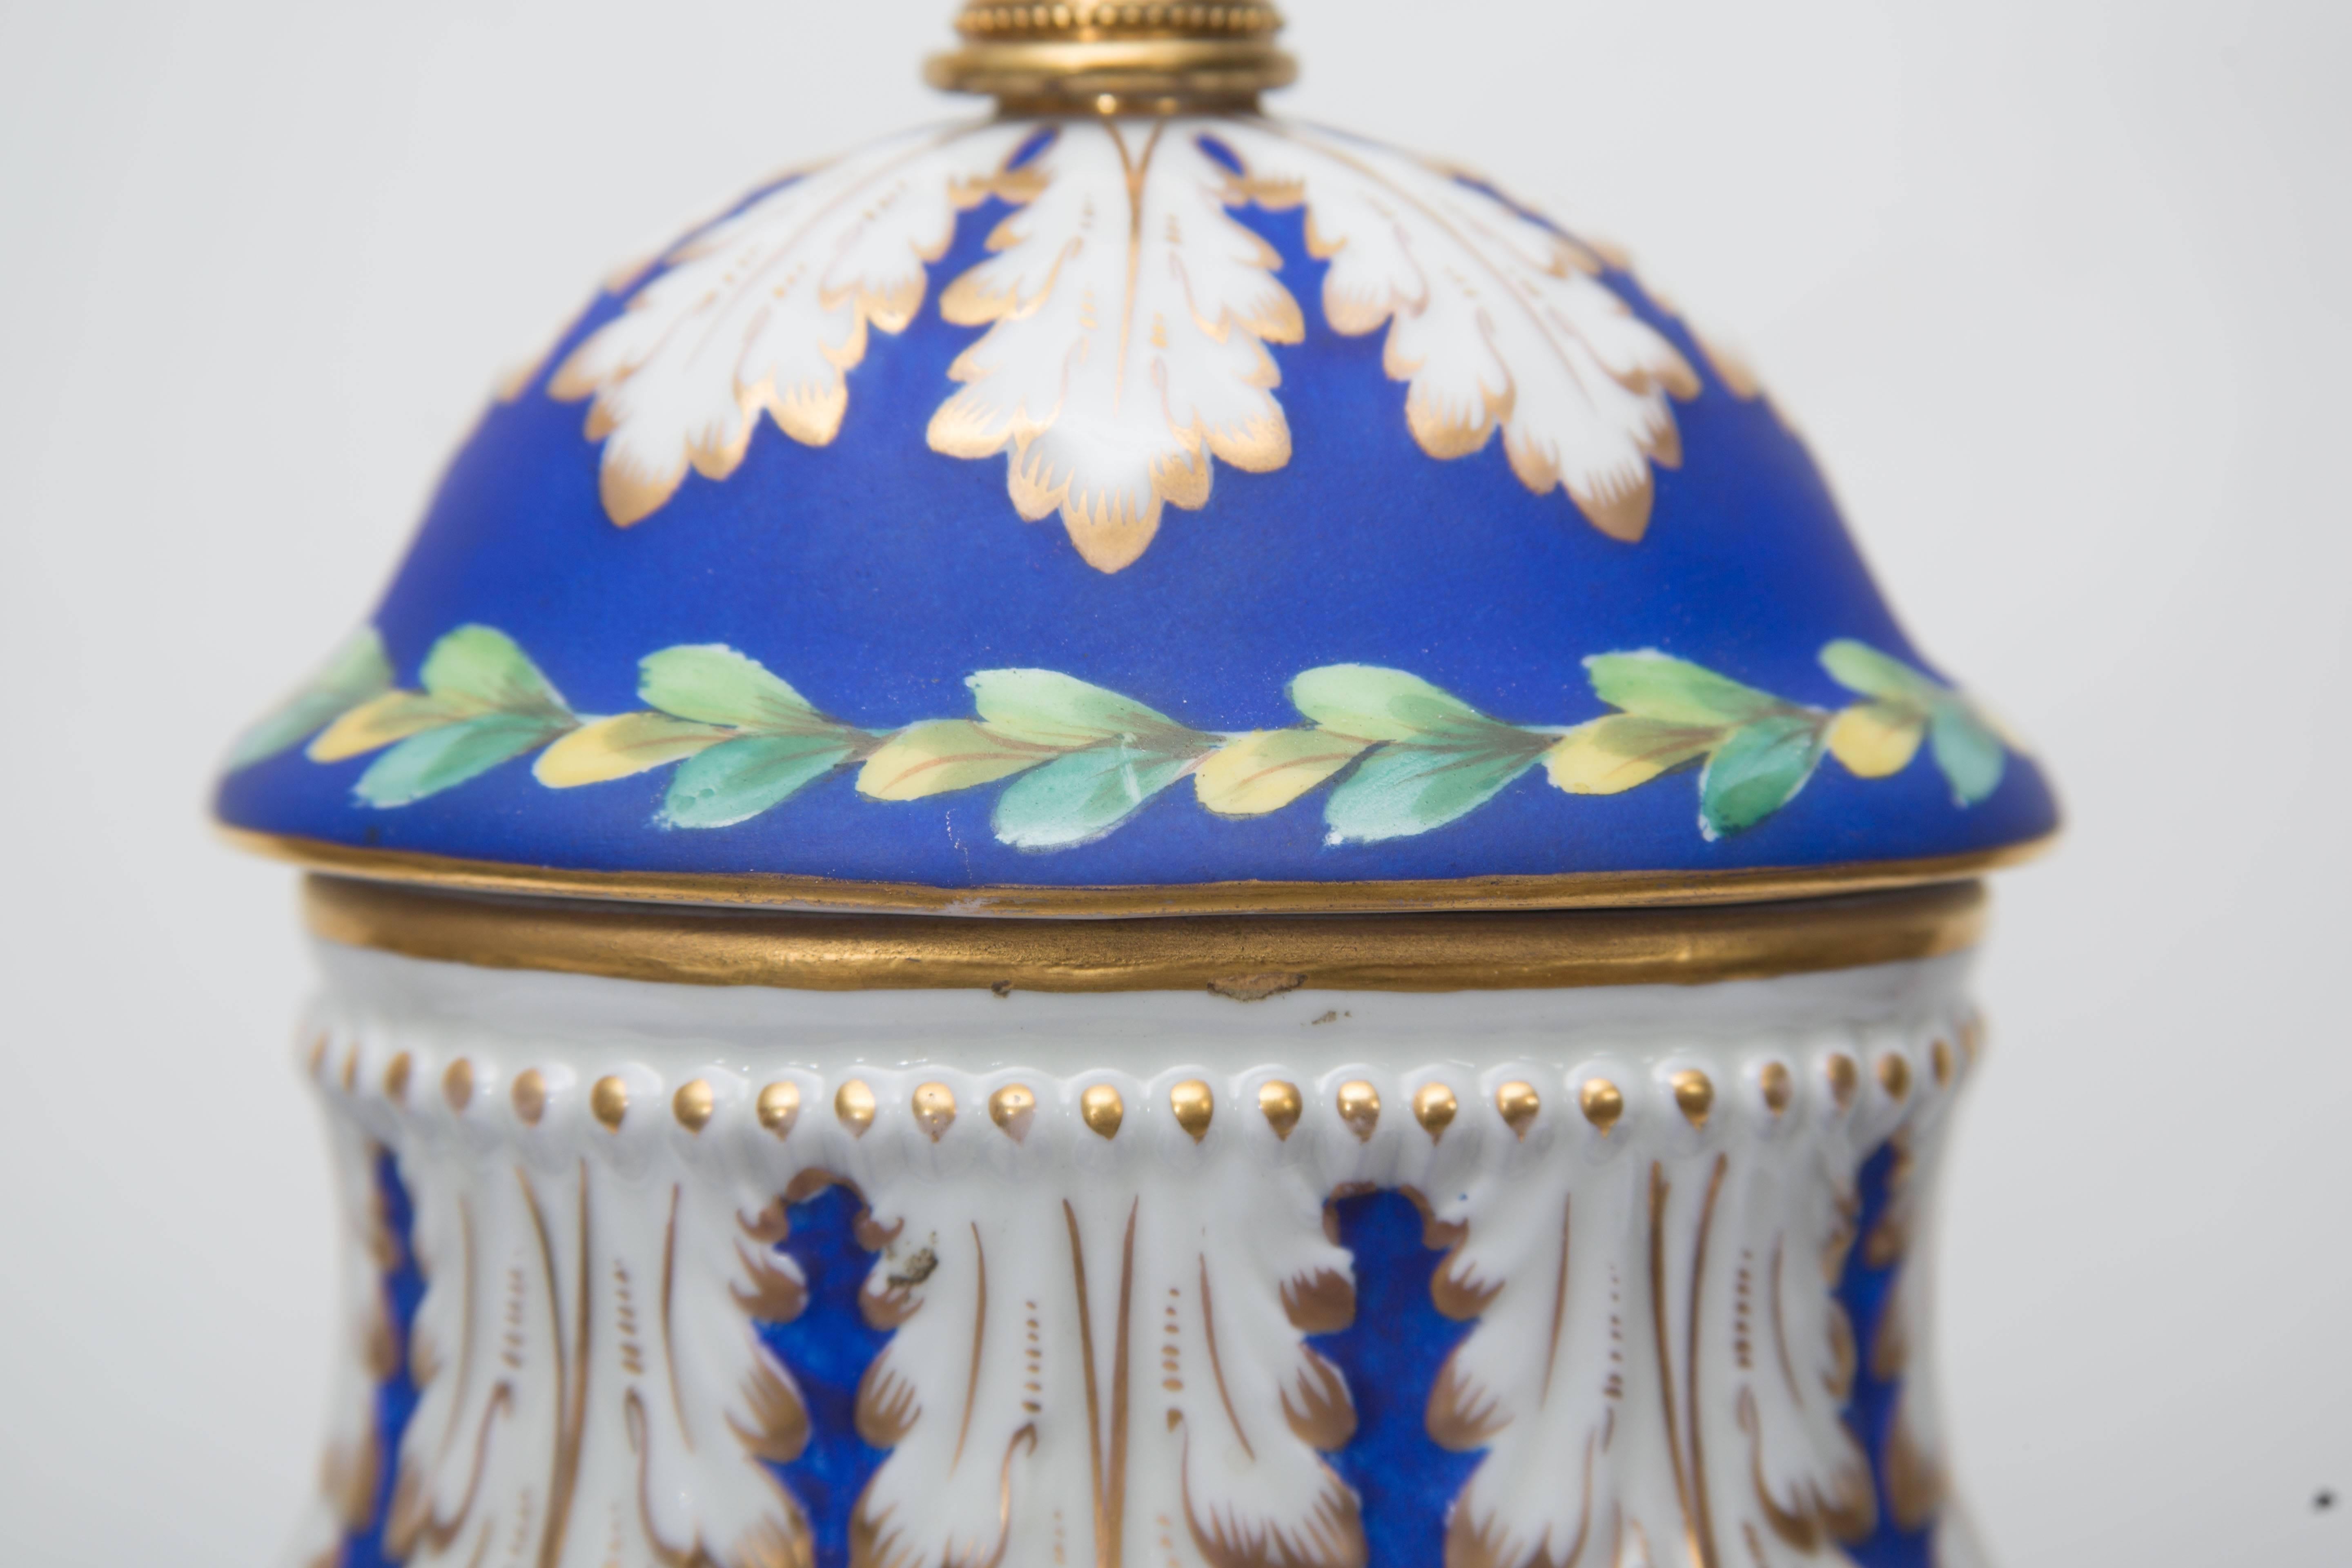 This is an elegant French glazed porcelain and bisque urn converted to a lamp. The oval-form vase with sphinx busts has a bisque section with painted flowers in a decorated basket on a blue background juxtaposed to white glazed and gilt heightened